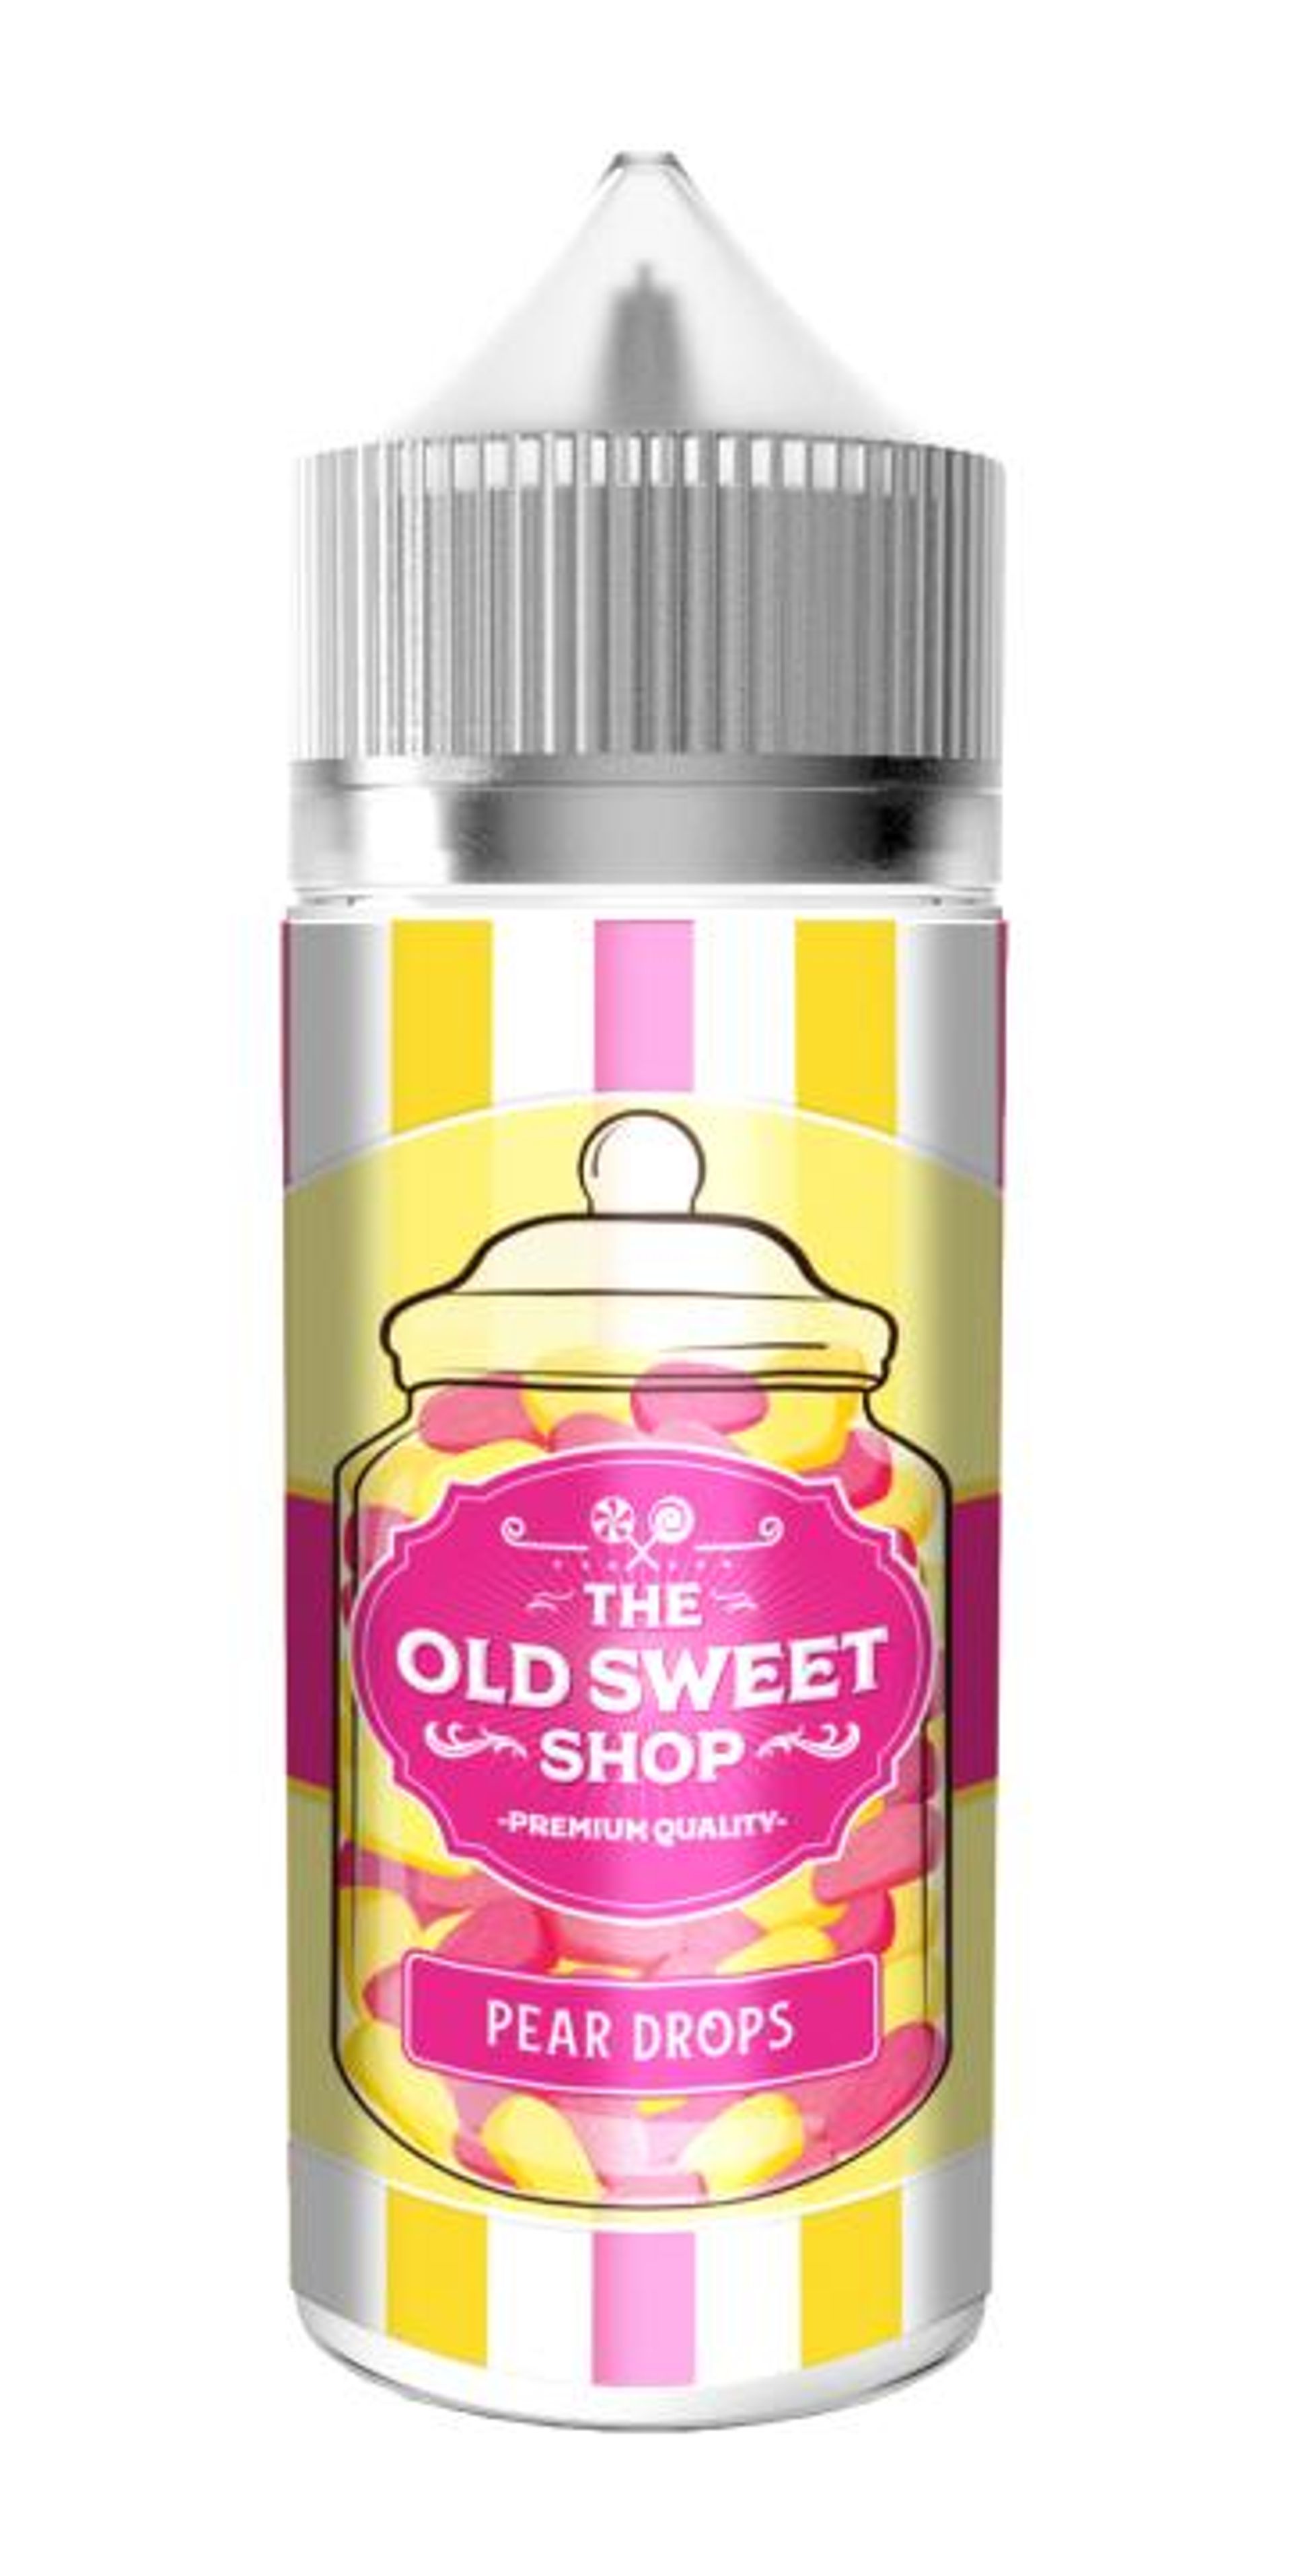 Image of Pear Drops by The Old Sweet Shop